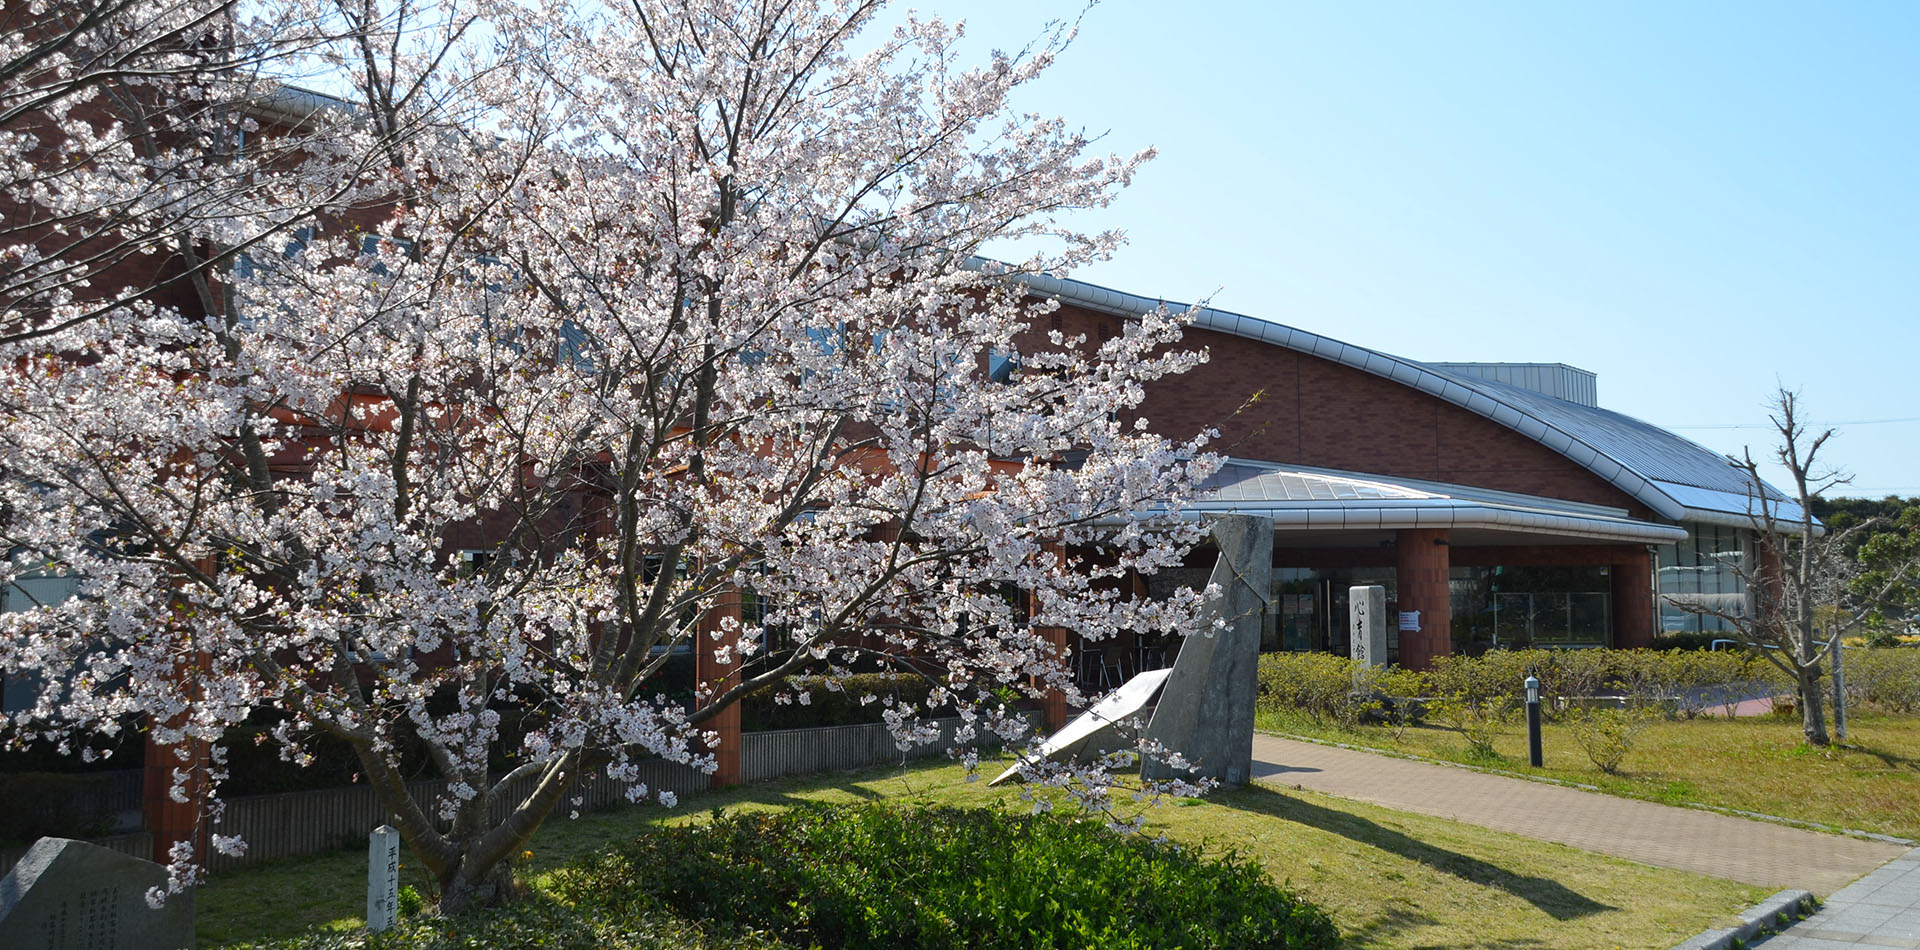 You can enjoy cherry blossoms right from Mihama IC.